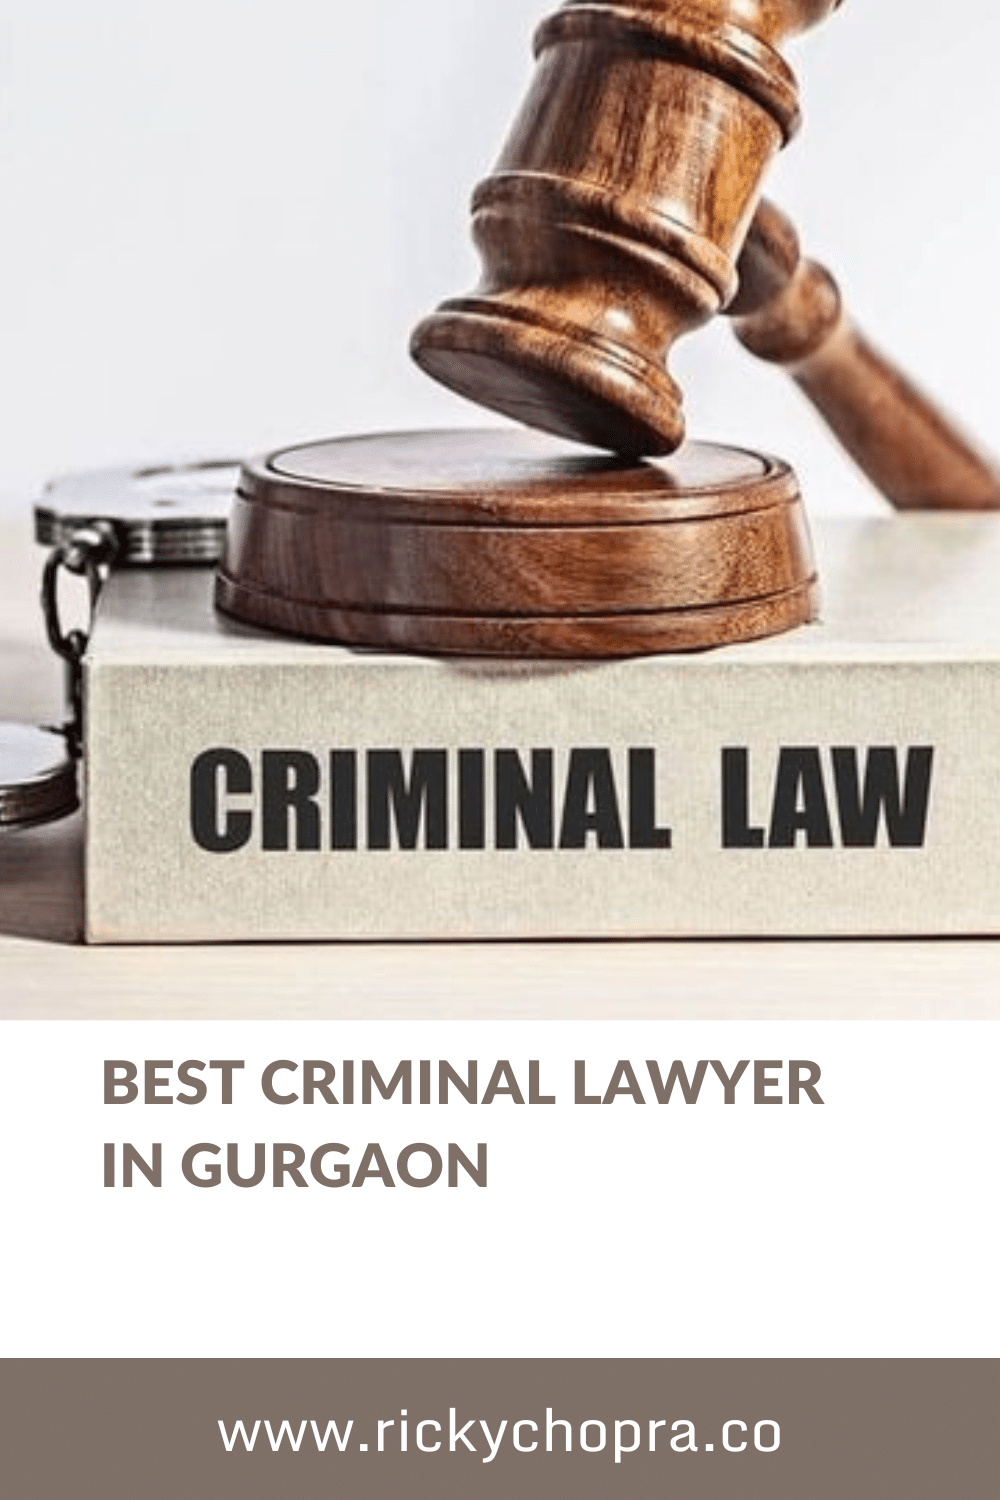 Best Criminal Law Firm in Gurgaon